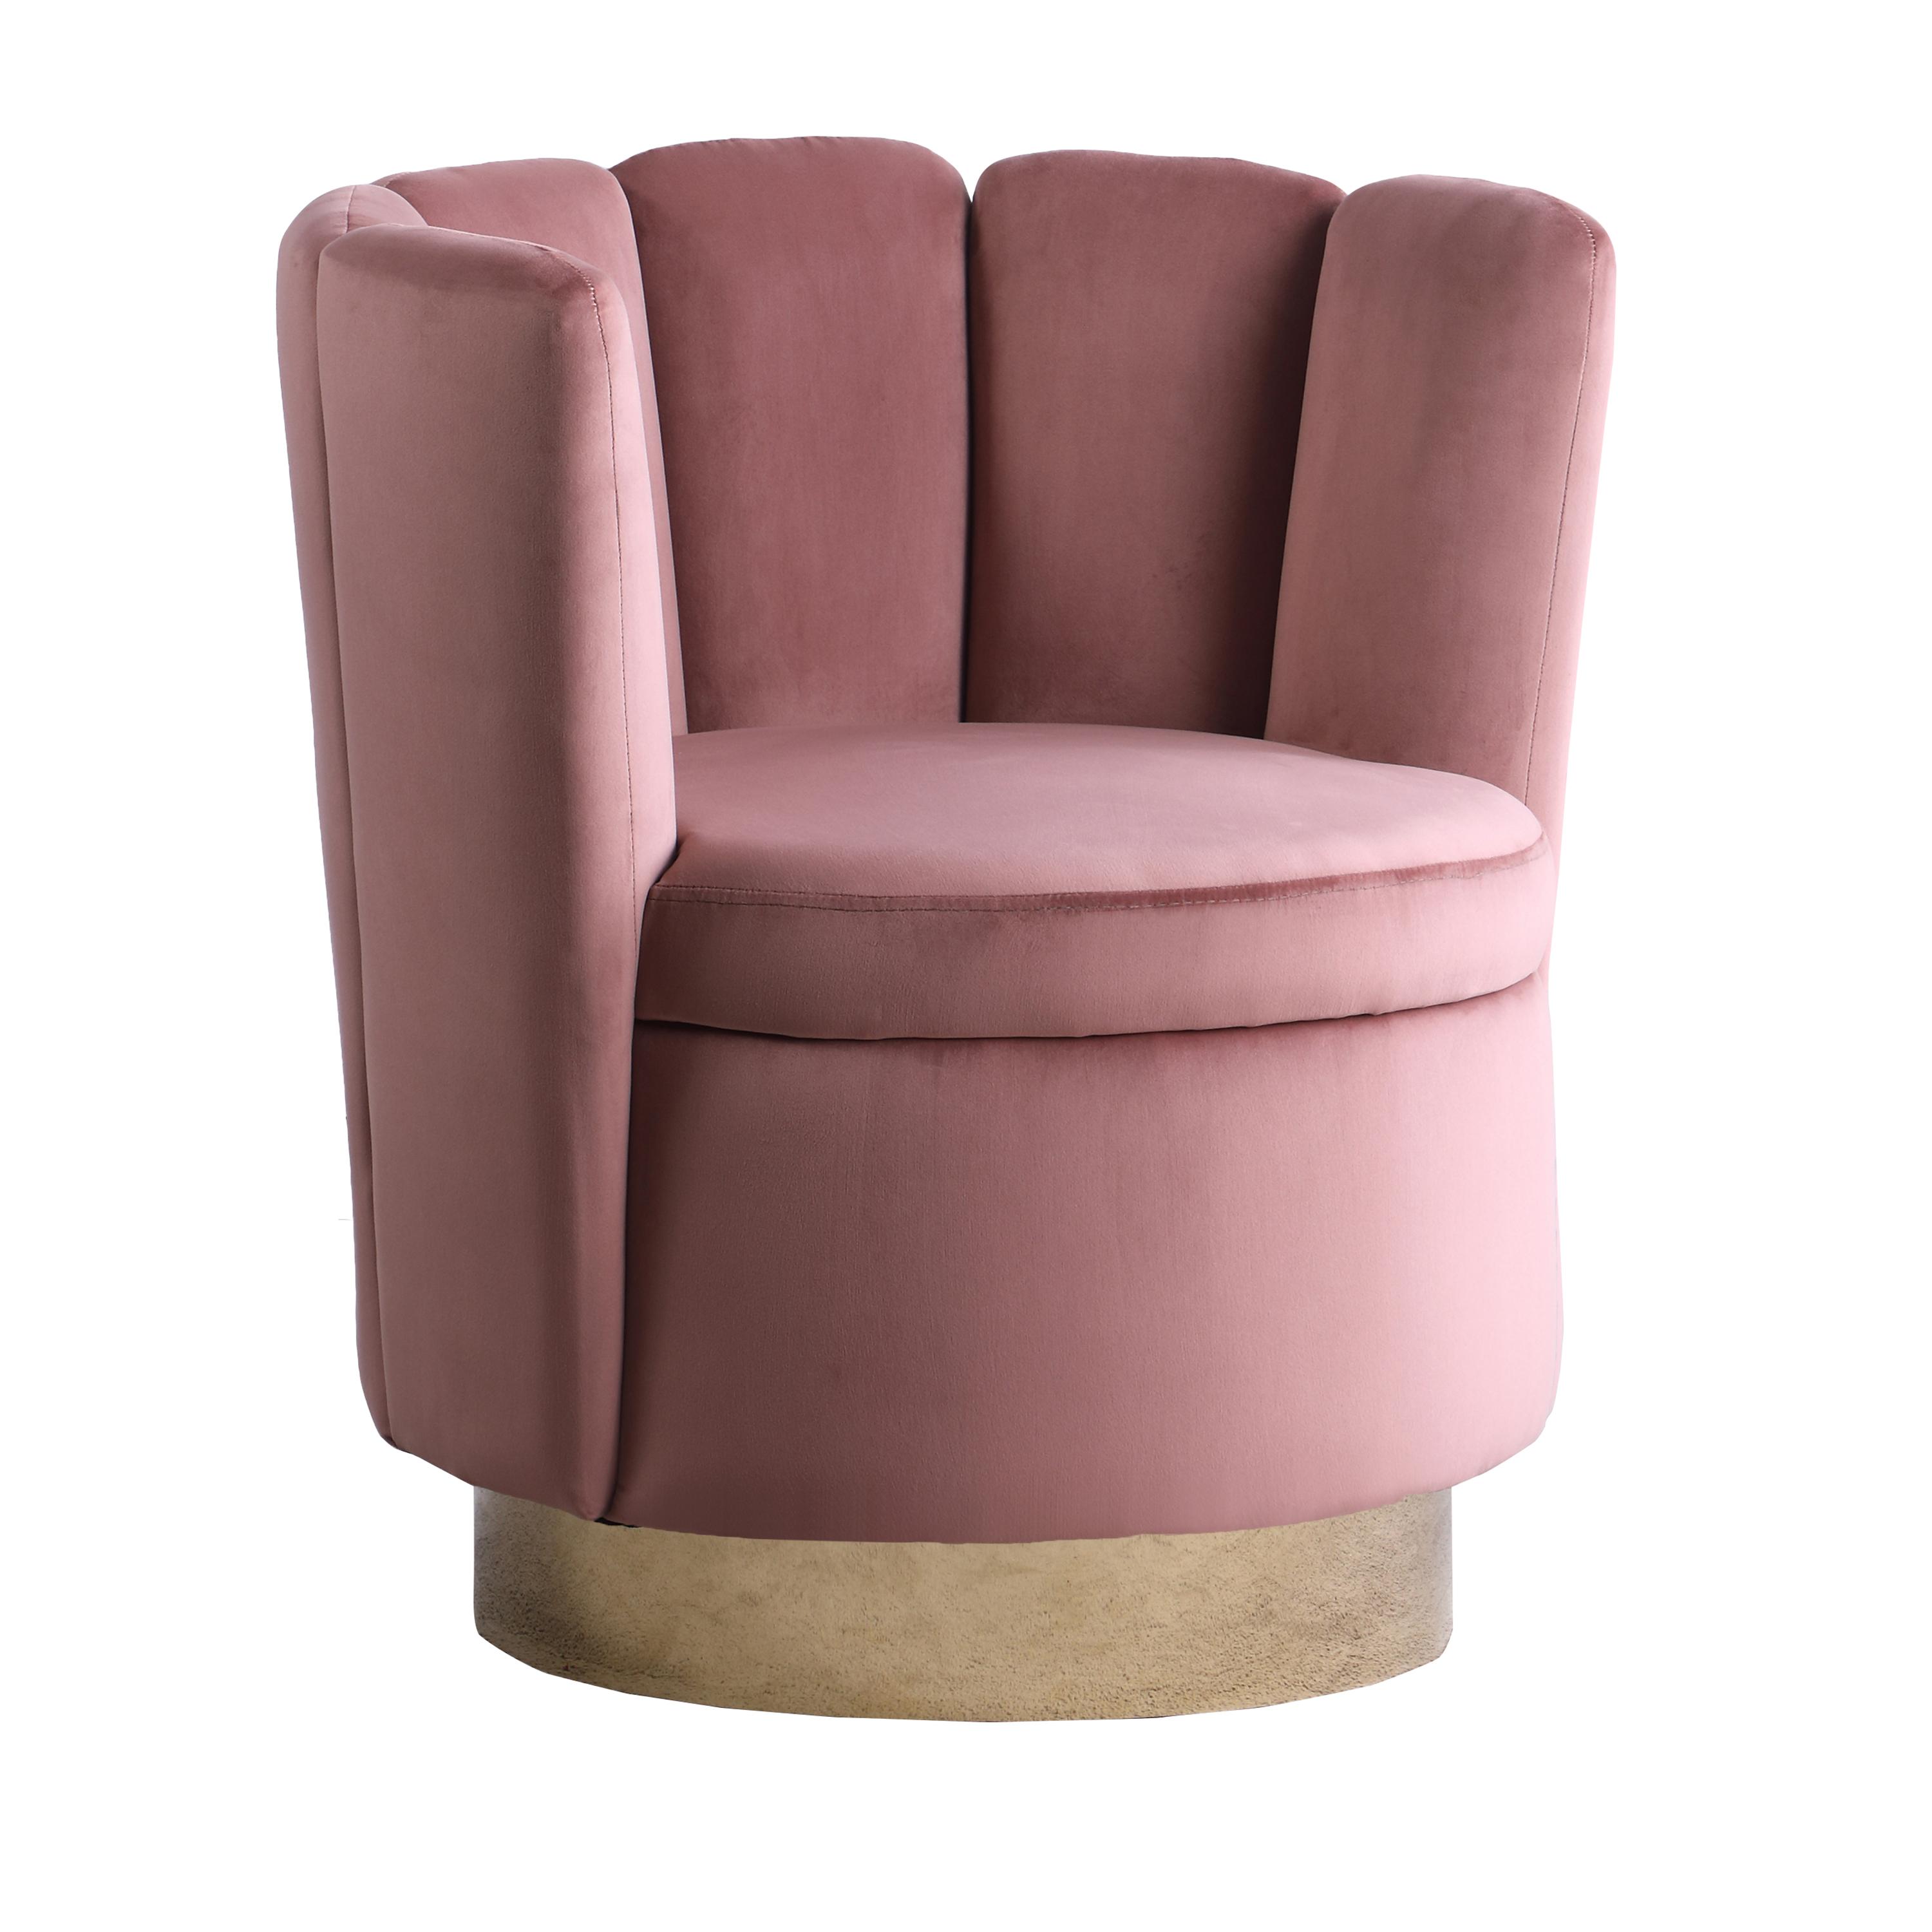 Contemporary Accent Chair 905648 905648 in Rose Velvet